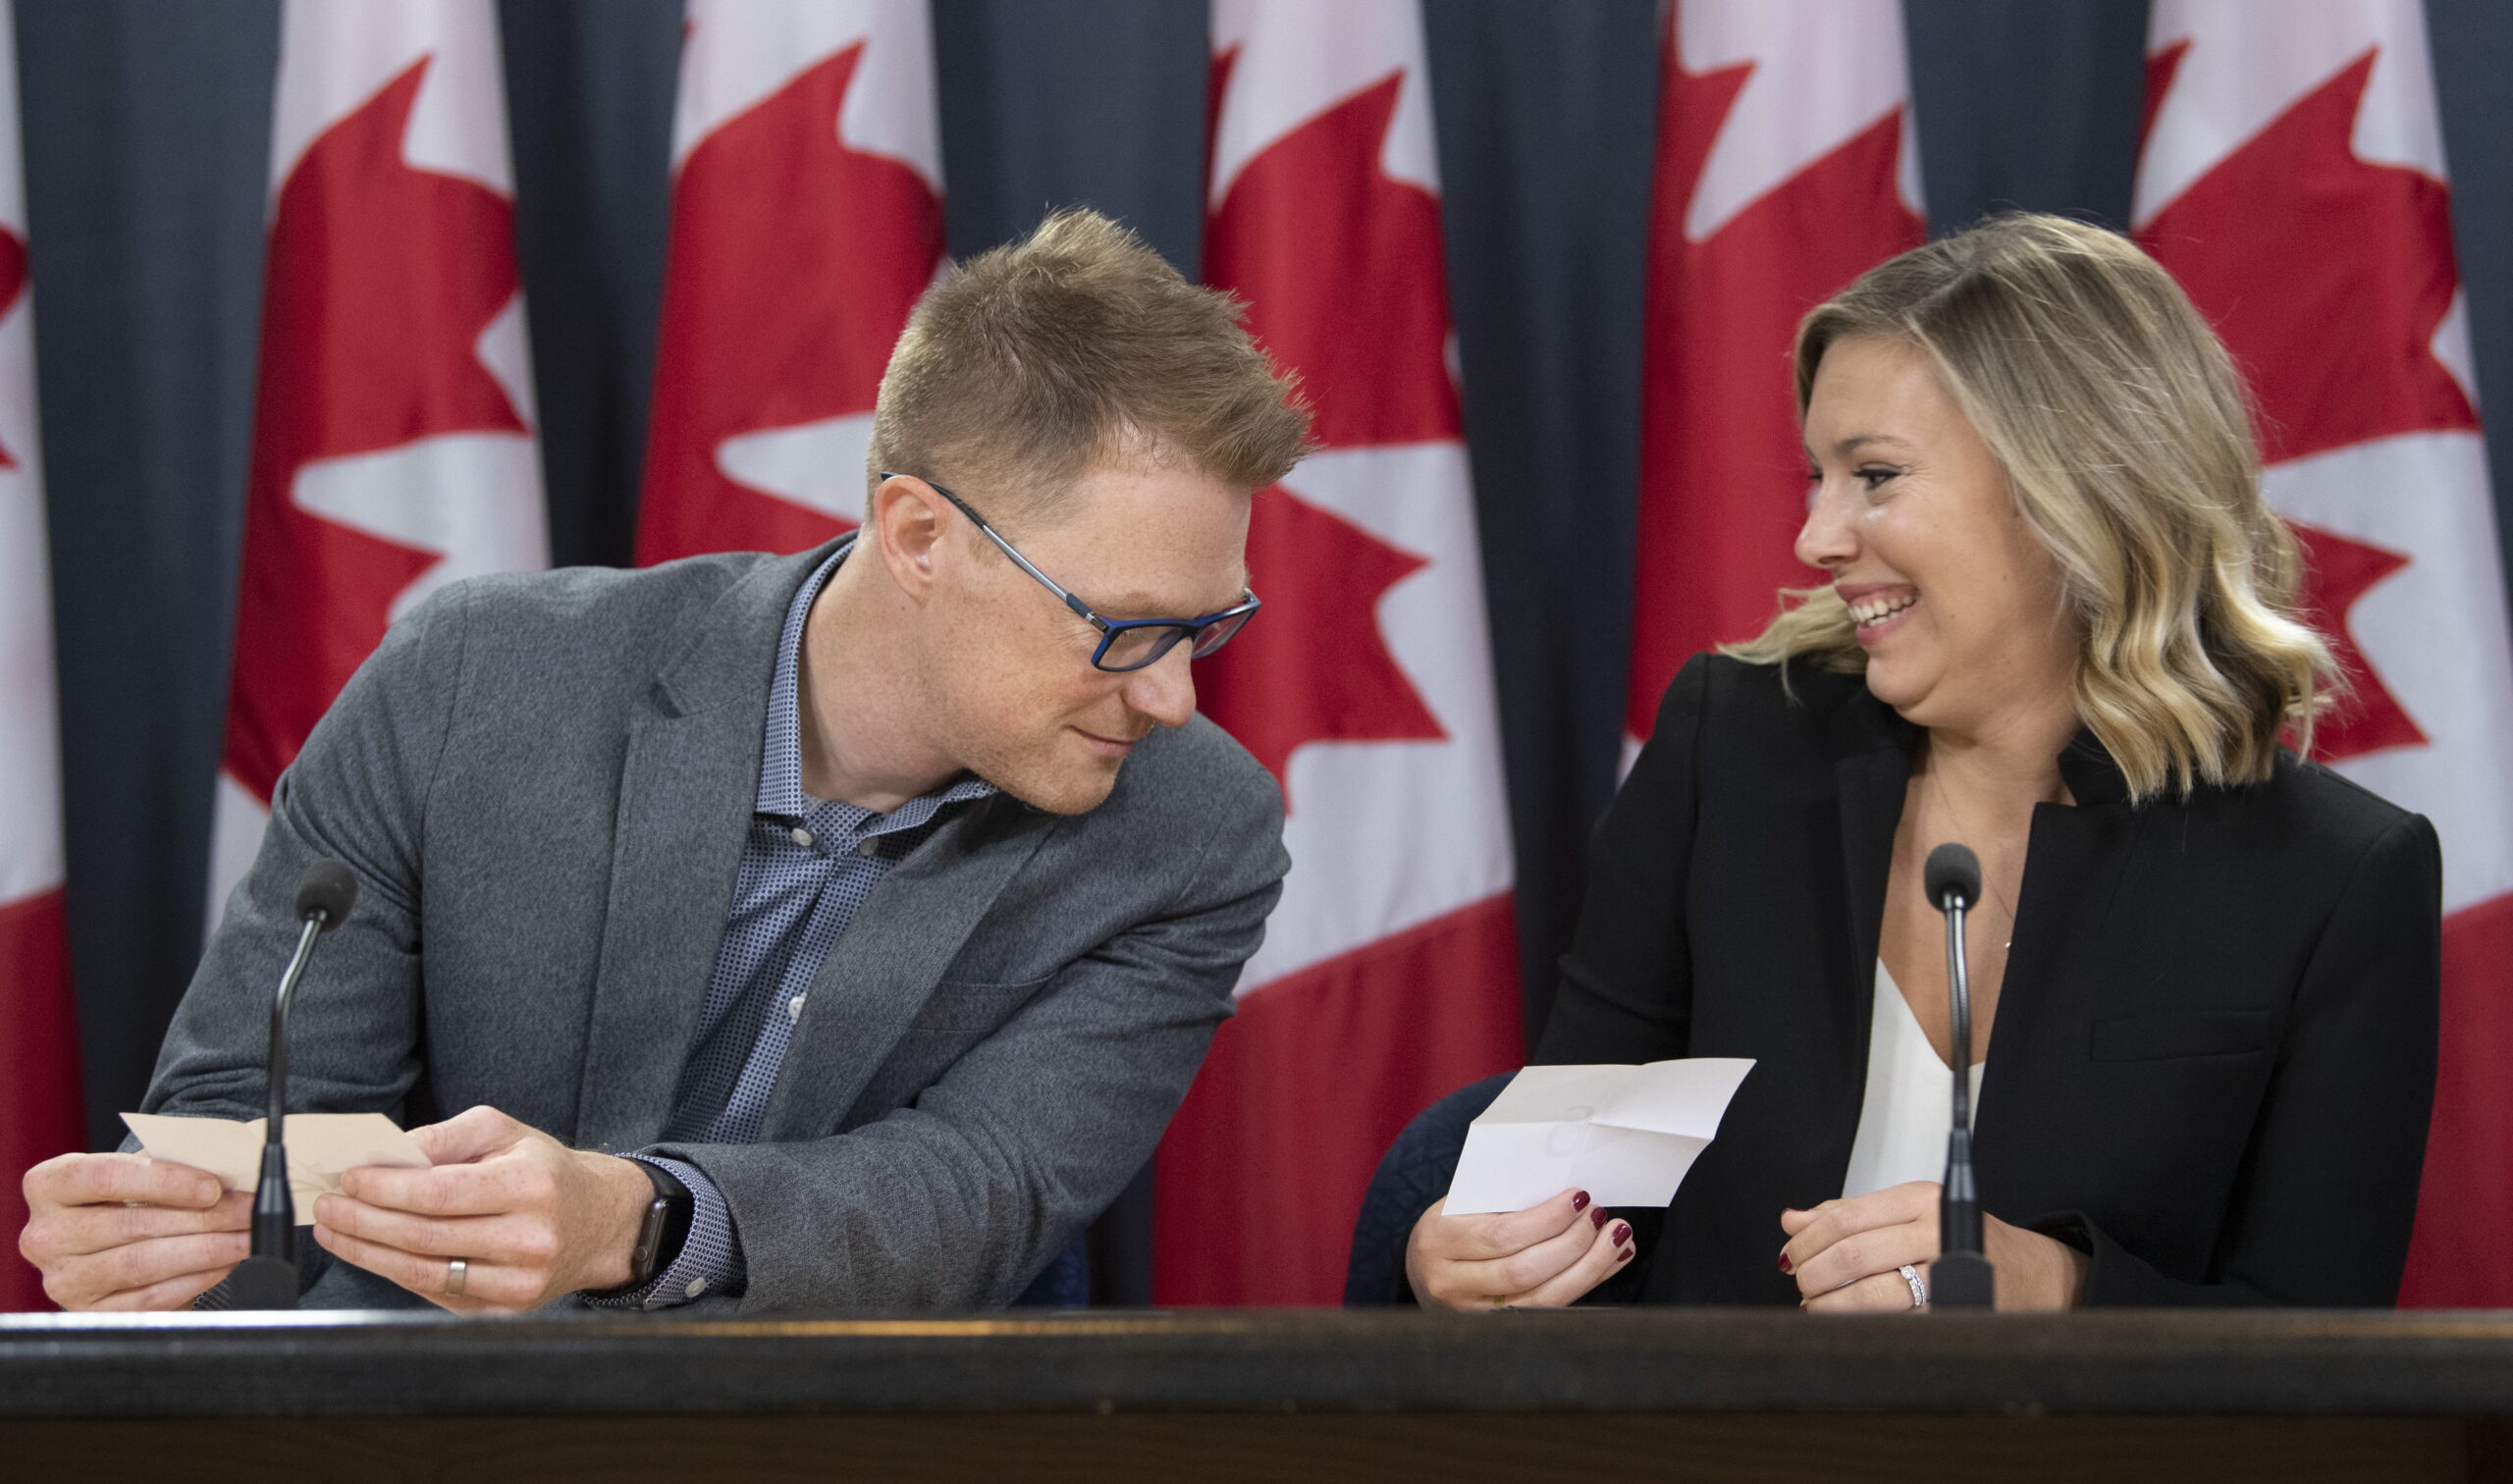 A man and a woman are sitting at a desk with Canadian flags in the background. They are both holding small pieces of white paper. The man, Brock Harrison, is wearing a grey-blue blazer with blue button shirt, blue-rimmed glasses and short-cropped hair. He is looking over at the woman,s paper. The woman, Kate Purchase, is wearing a black blazer with a white shirt, and shoulder-length hair. She is smiling.